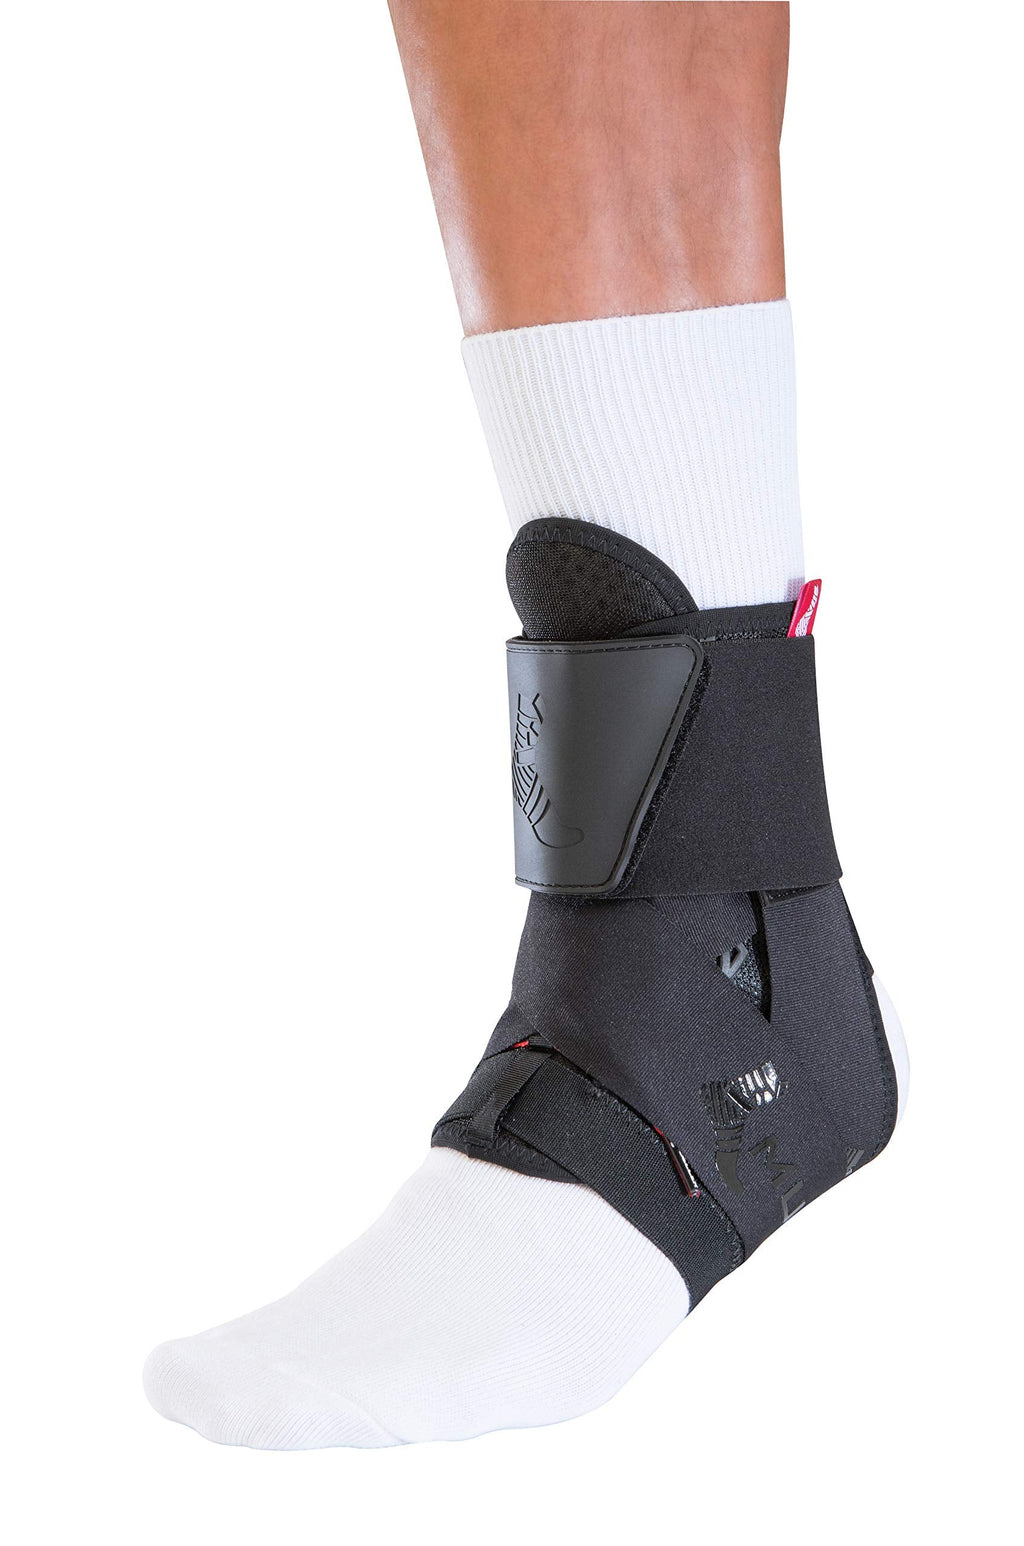 [Australia] - Mueller Sports Medicine The One Ankle Support Brace, For Men and Women, Black, XXX-Large 